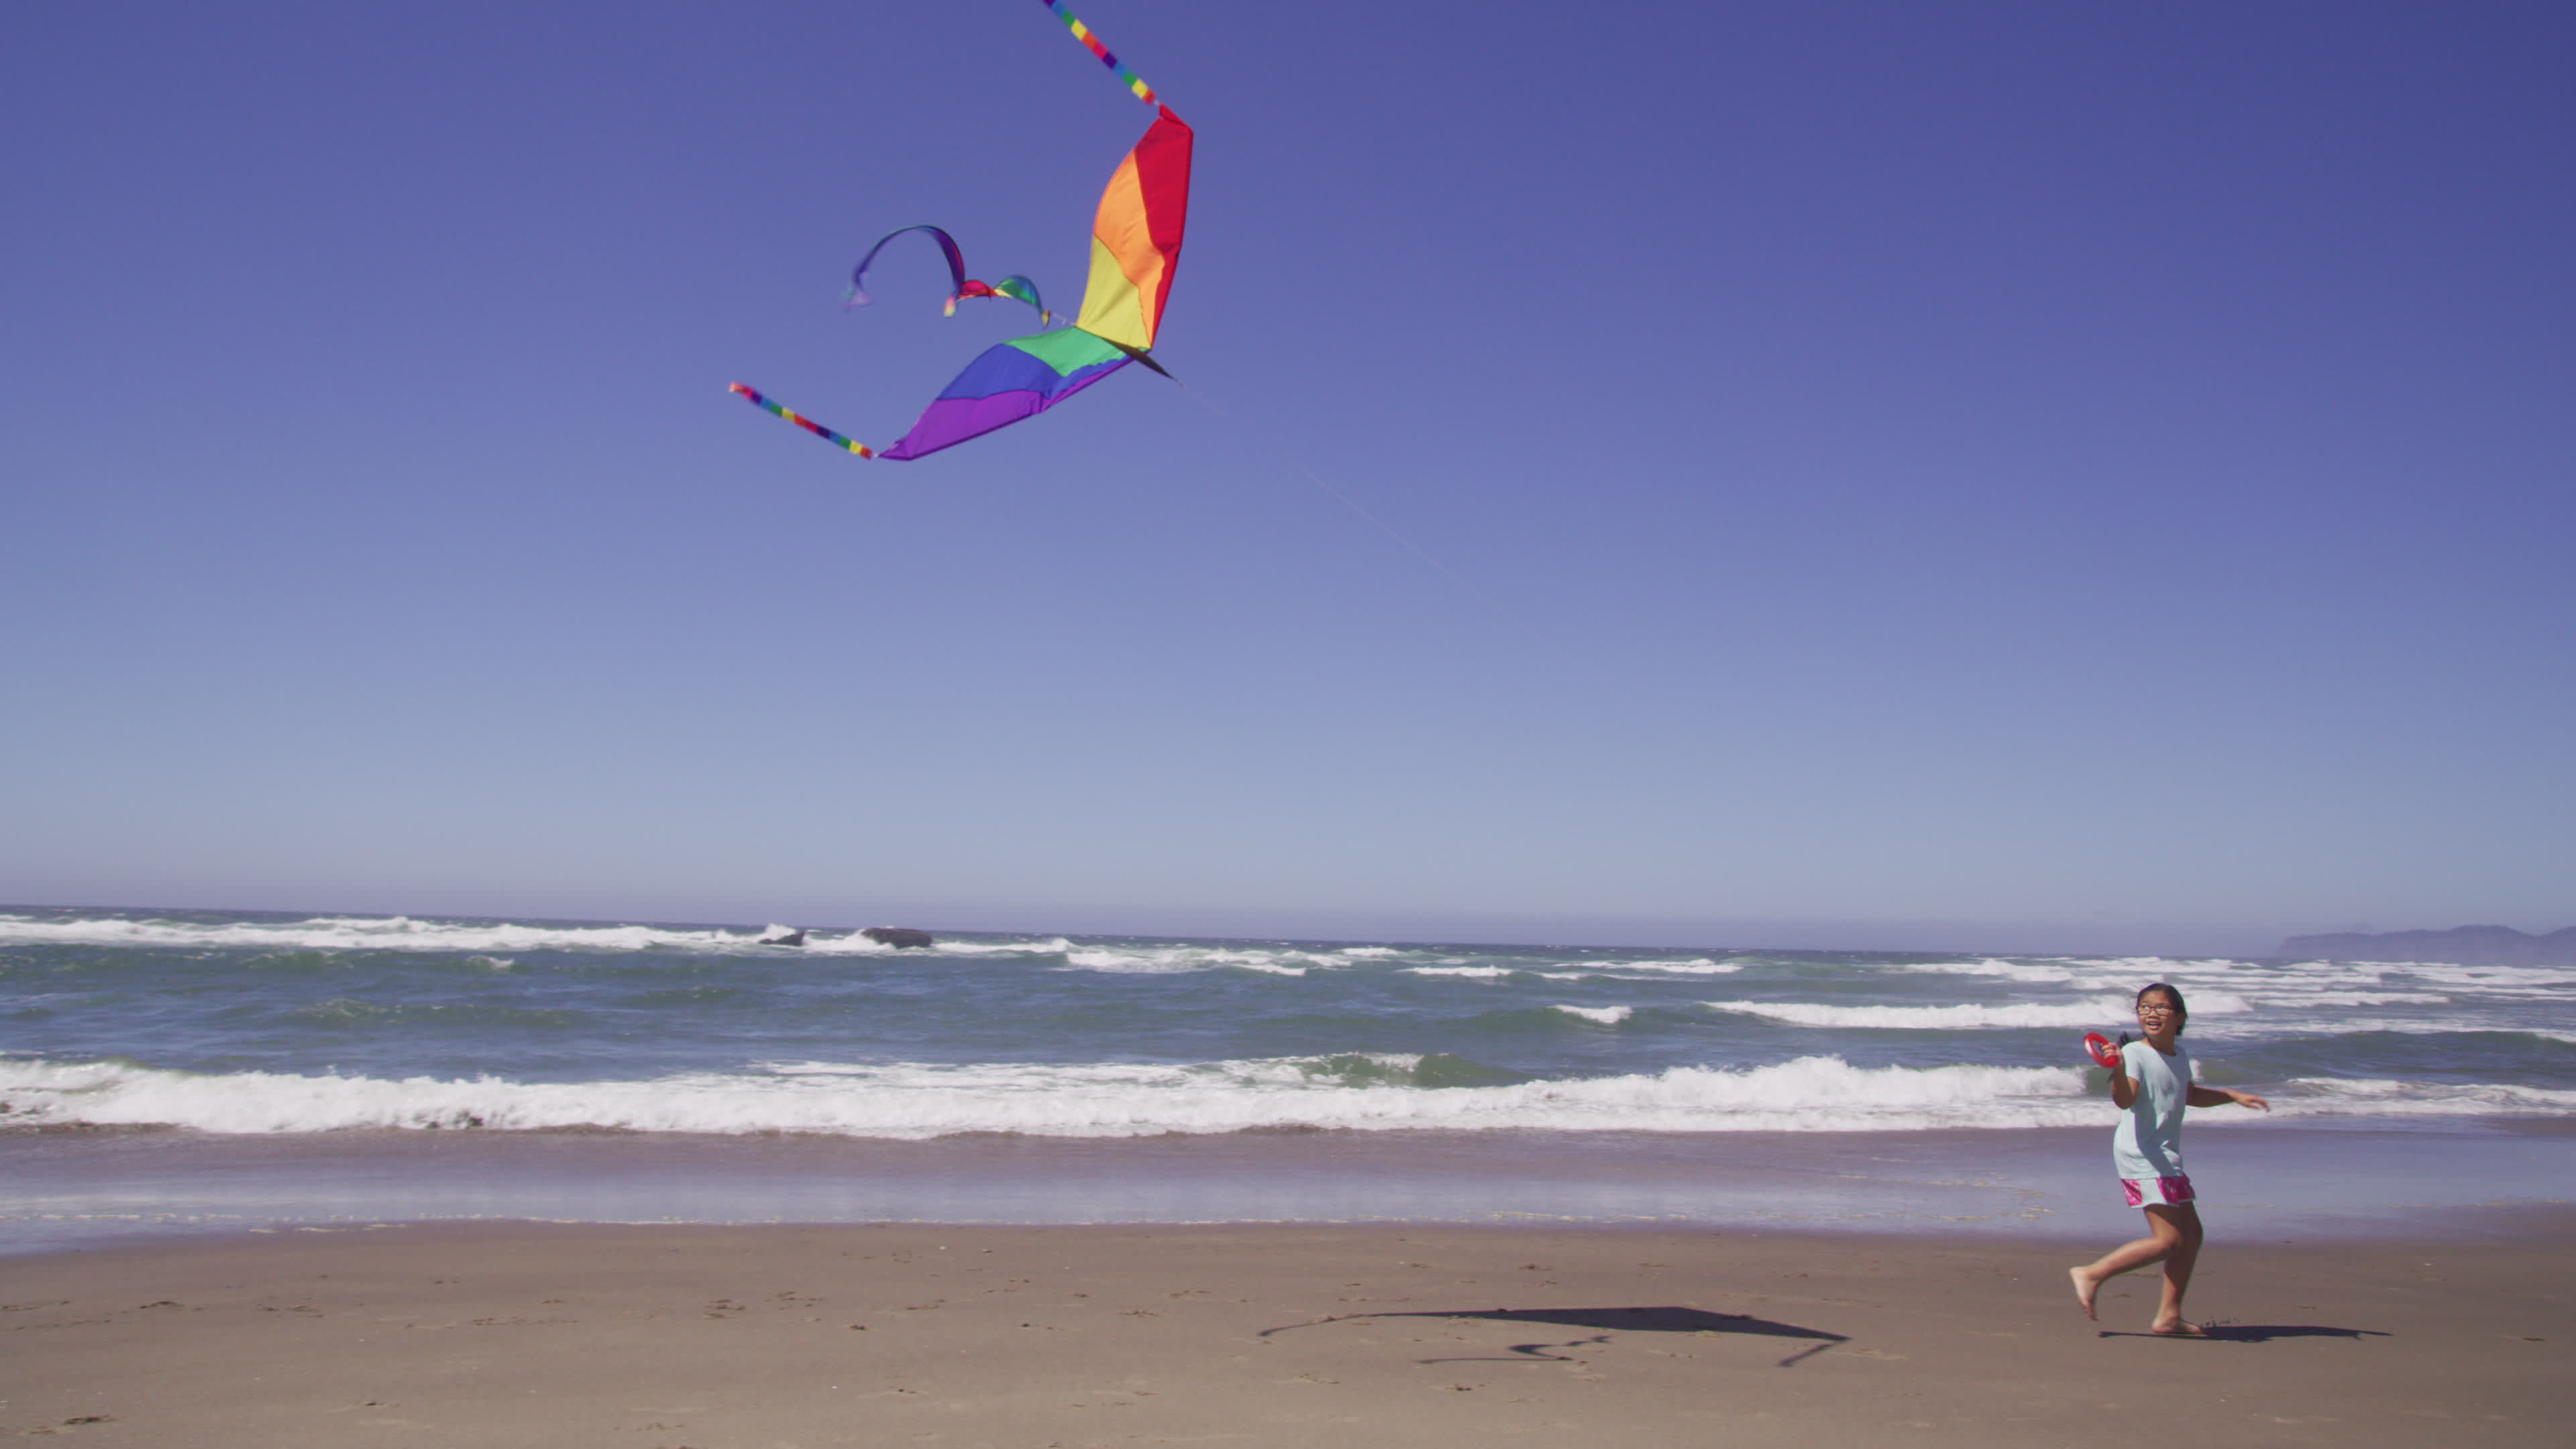 Kite Flying: Flying a kite at the beach, Triangle shape, Control basics. 3840x2160 4K Wallpaper.